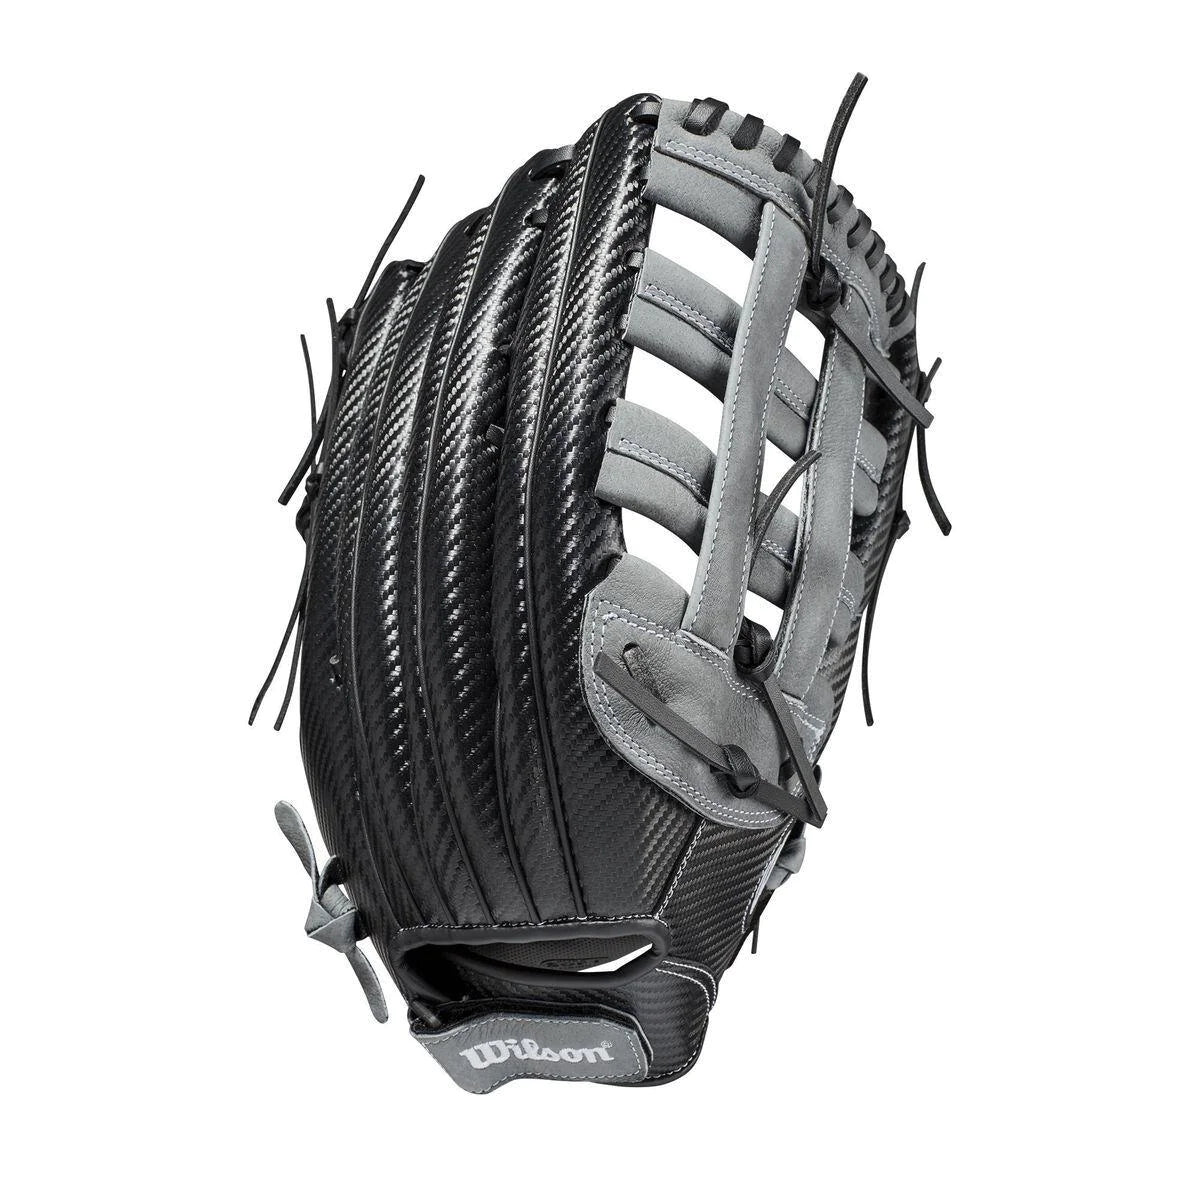 Wilson A360 15" Slo-Pitch Glove - Right Hand Throw Black and Grey